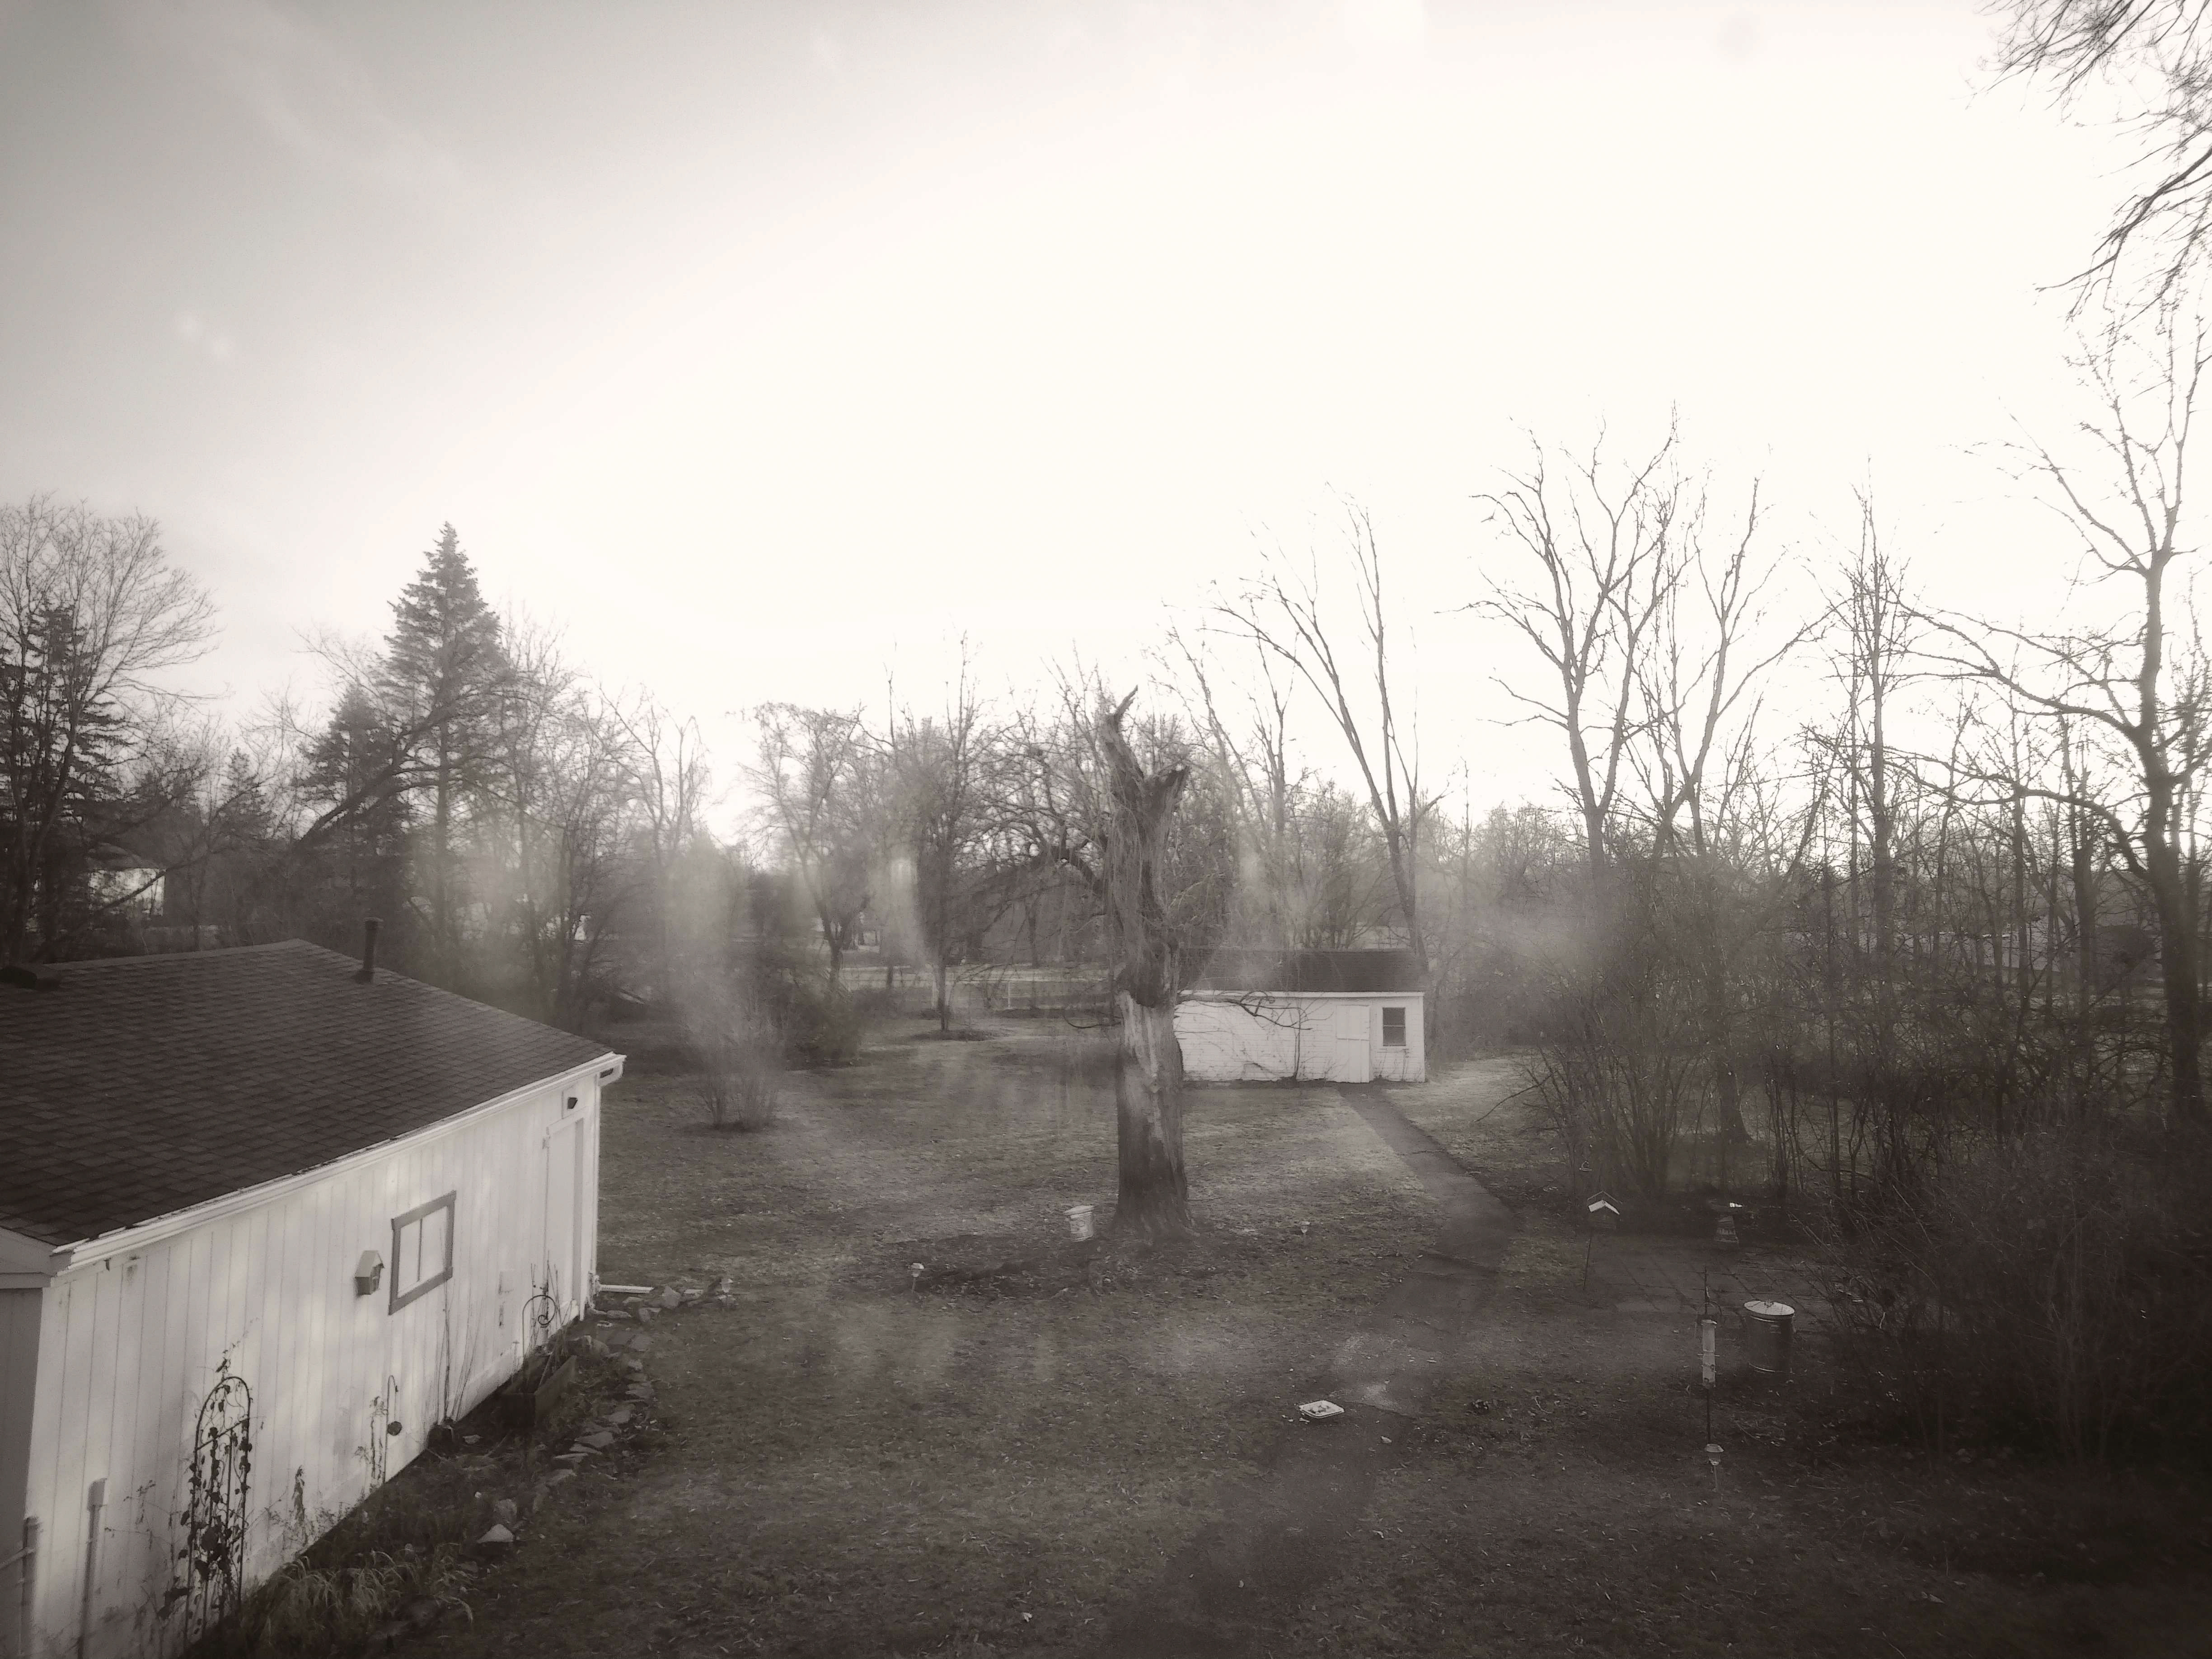 (In black and white) An elevated shot of a backyard. On the left is a simple 1 story garage, in the center is a willow tree and further back is a white shed. On the right is a lot of landscaping and critter feeders.